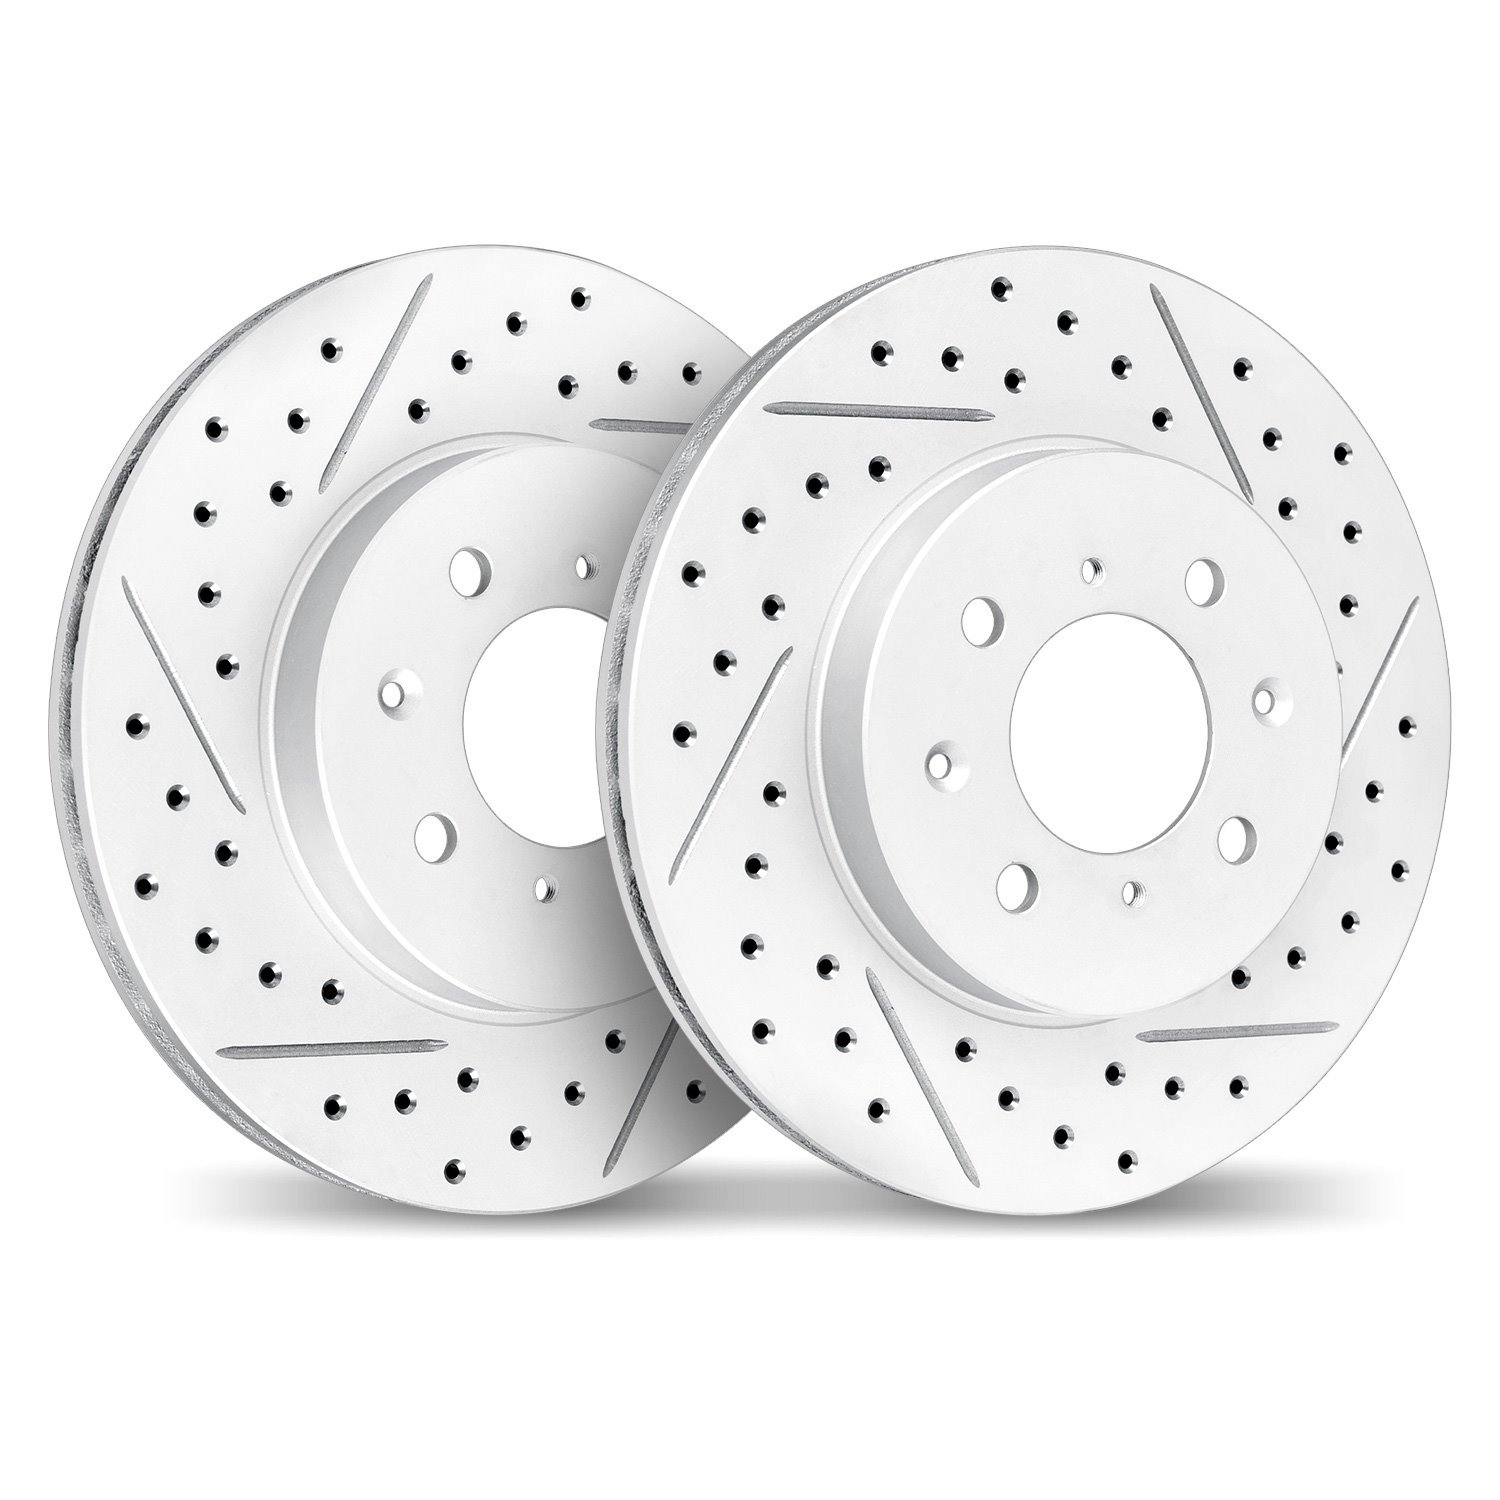 2002-76029 Geoperformance Drilled/Slotted Brake Rotors, 2001-2003 Lexus/Toyota/Scion, Position: Front